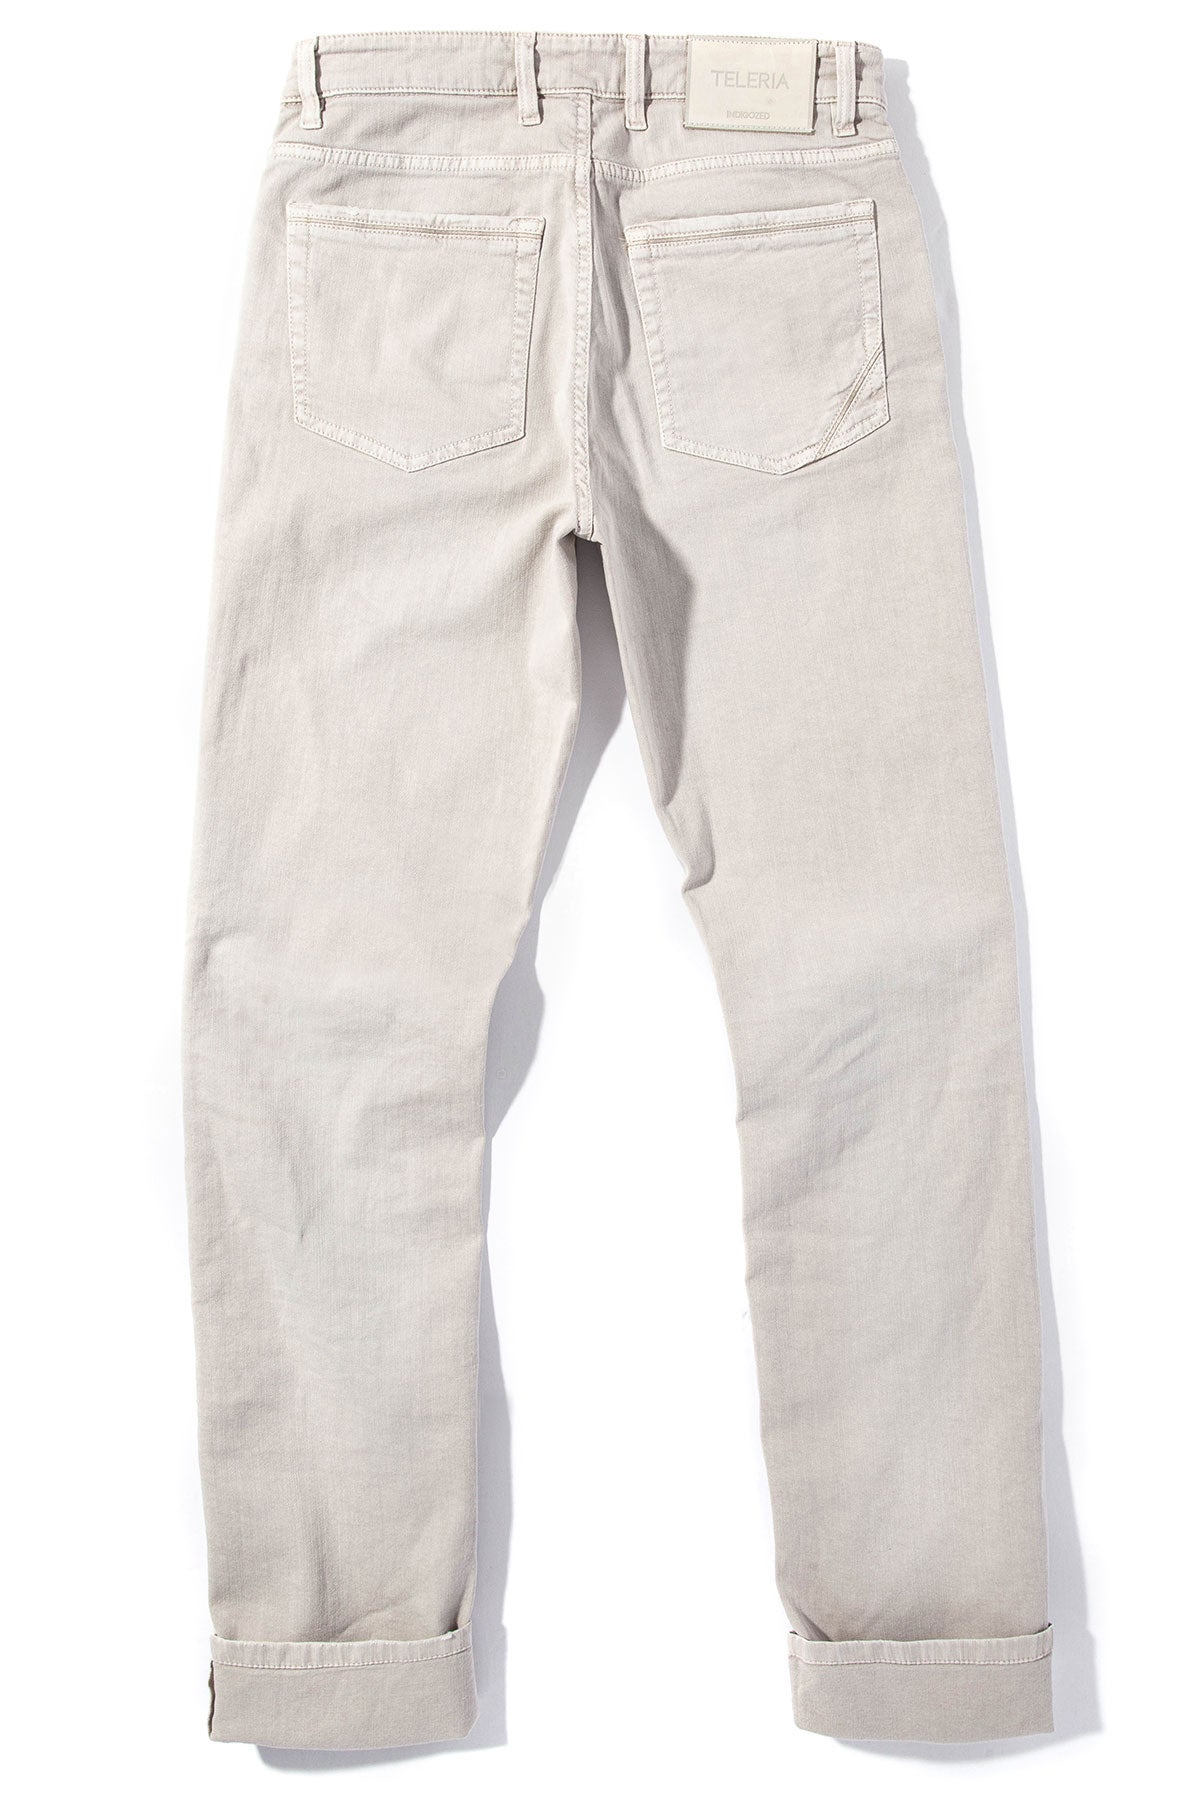 Ouray 5-Pocket Stretch Twill in Sasso | Mens - Pants - 5 Pocket | Teleria Zed